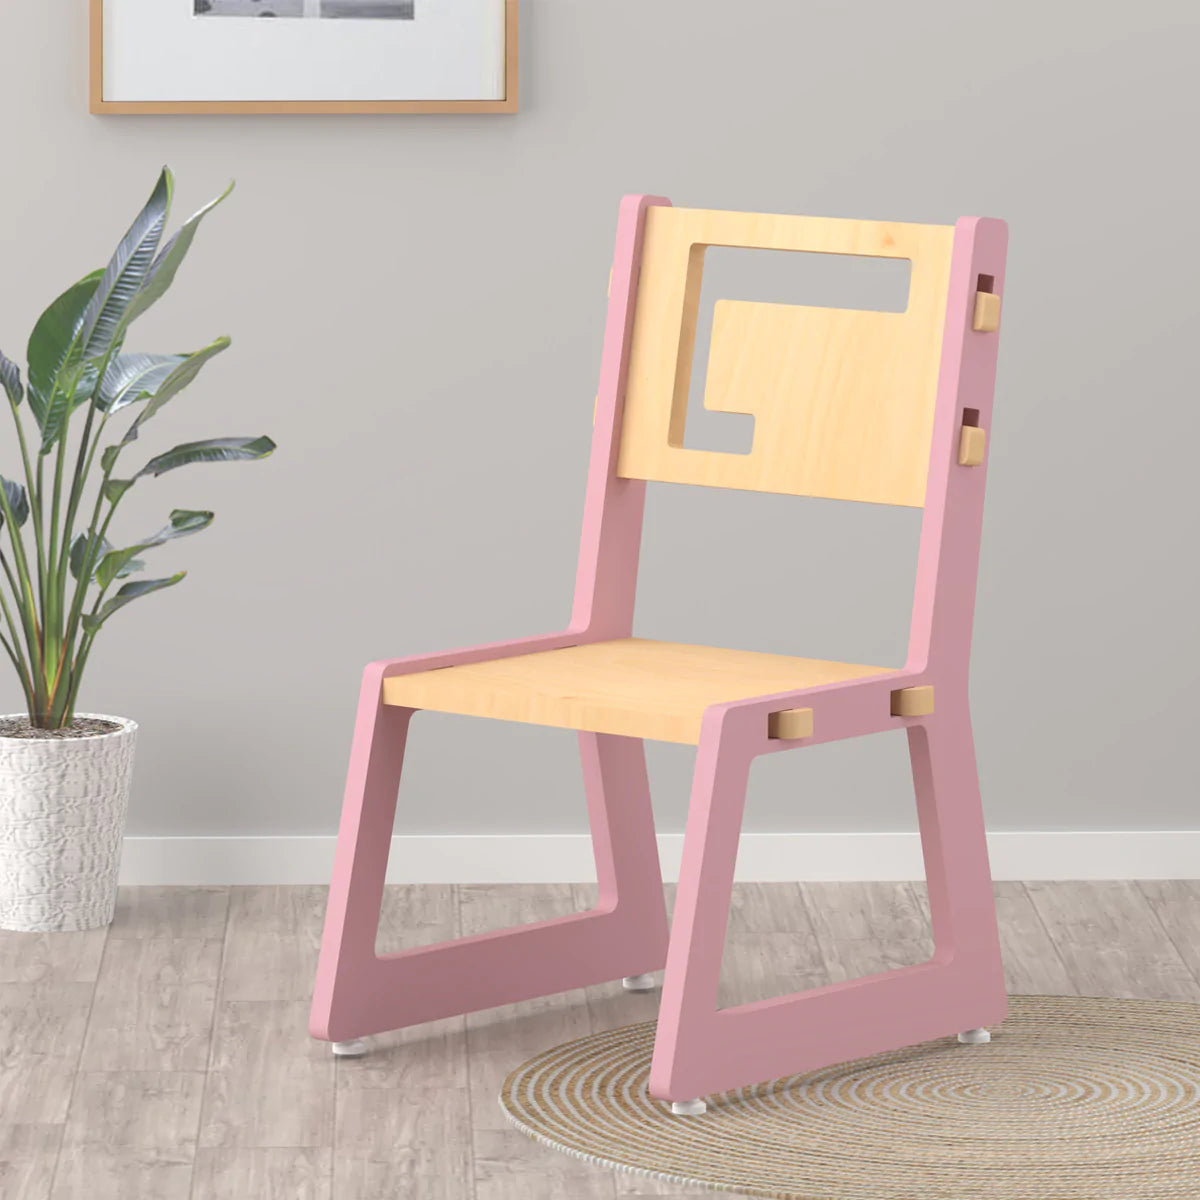 Buy Blue Apple Wooden Chair - Pink - Learning Furniture - SkilloToys.com